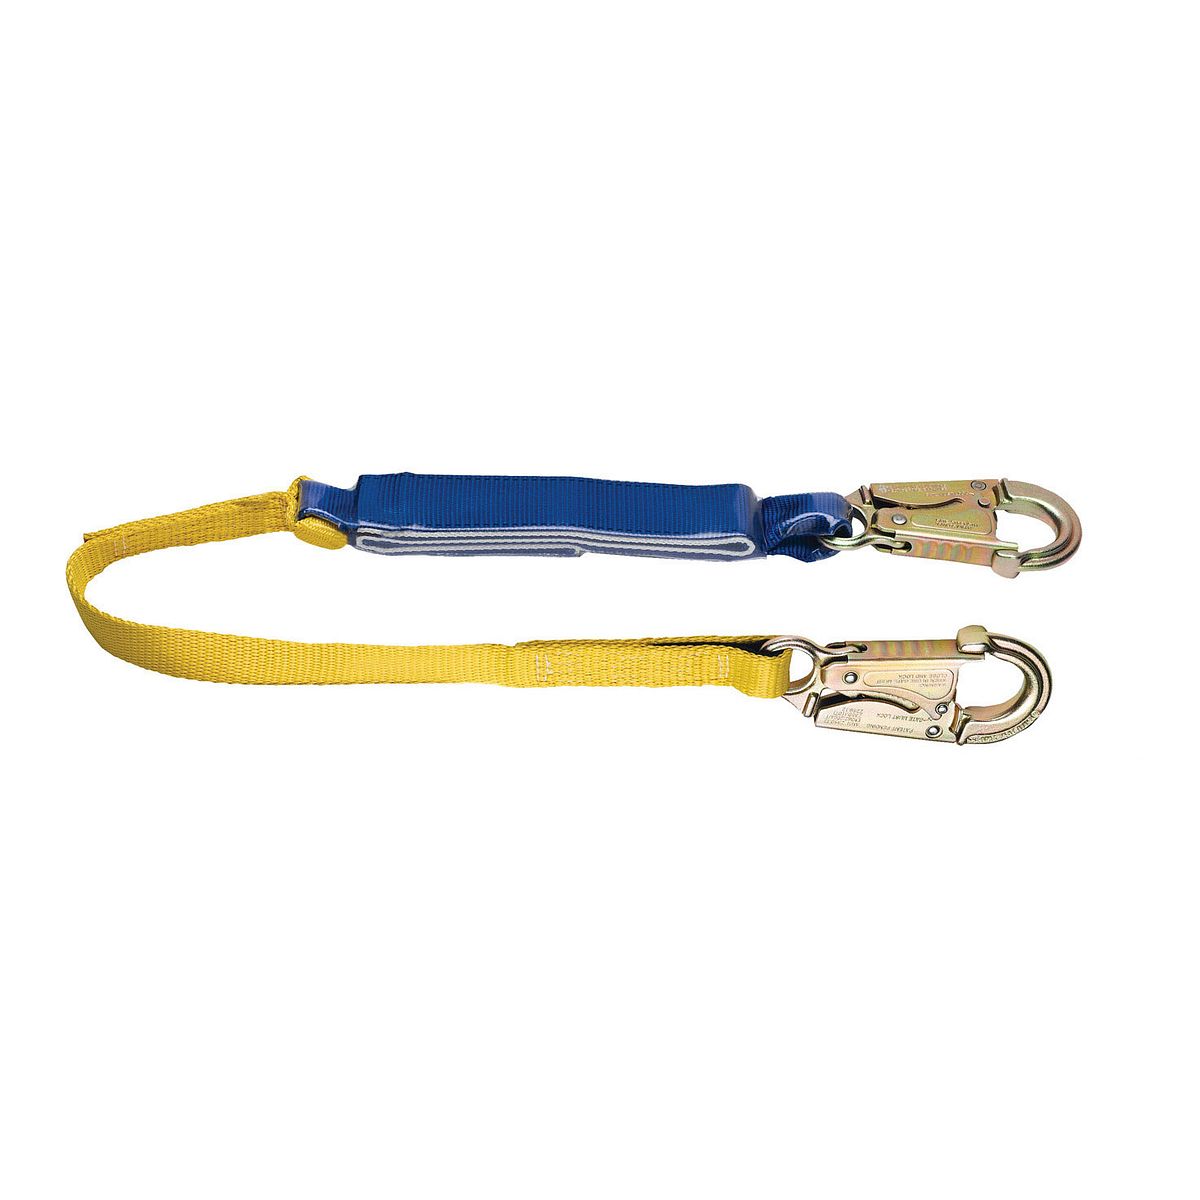 Werner 3 Foot Decoil Single Leg Lanyard with Steel Snap Hooks from Columbia Safety